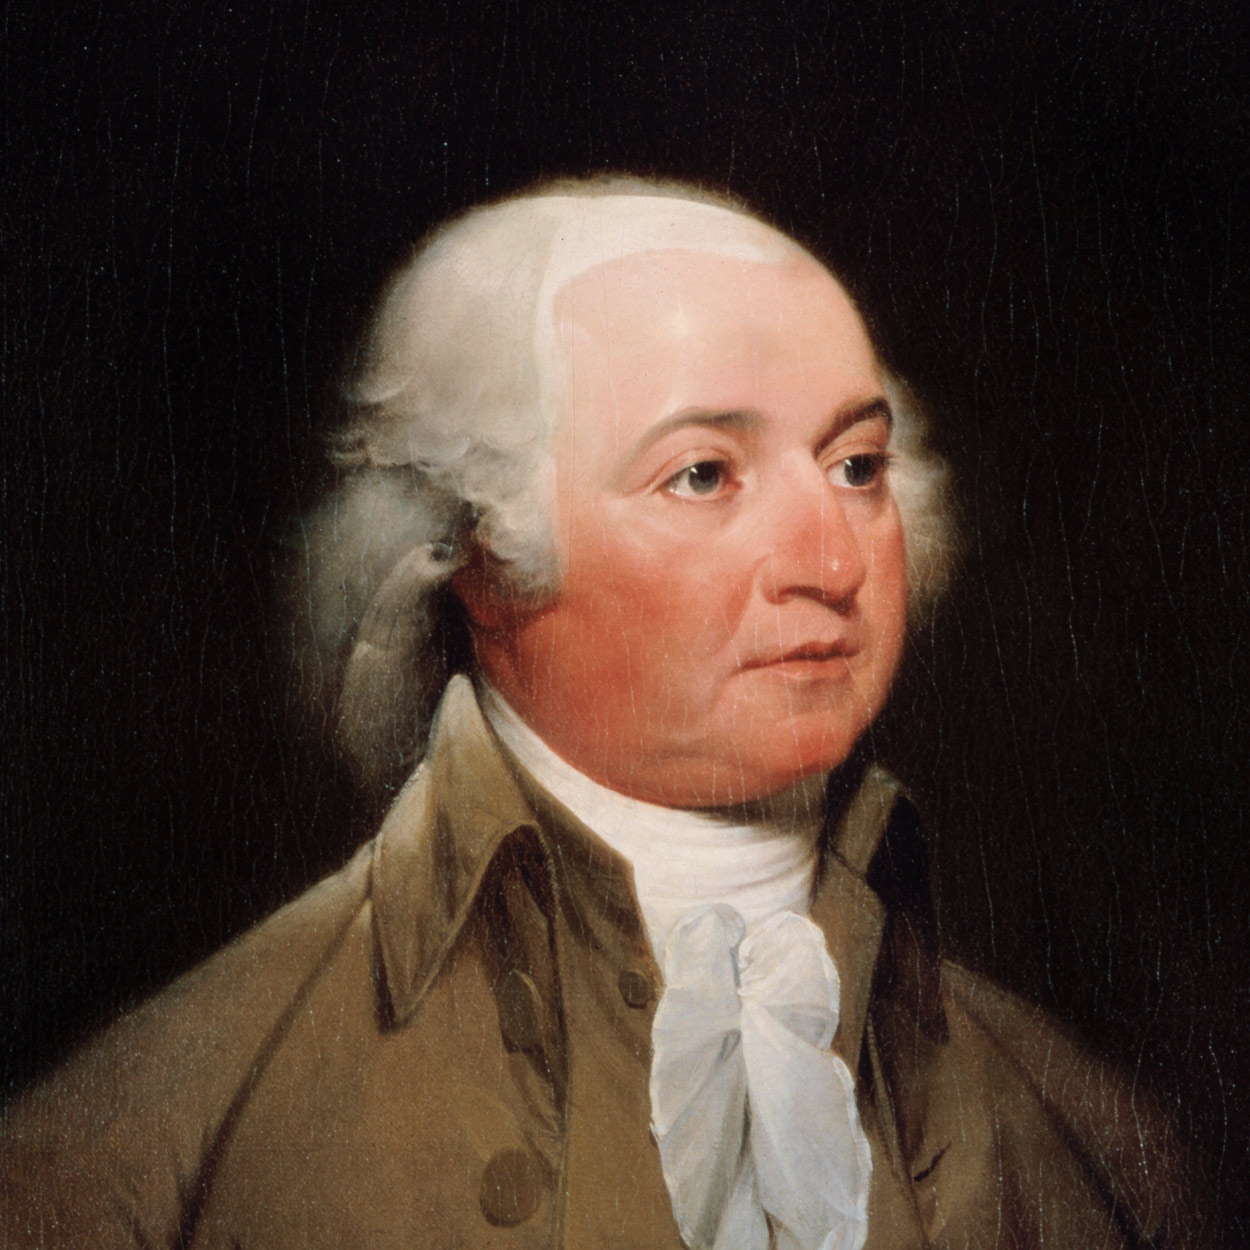 Portrait of John Adams, the 2nd President of the United States